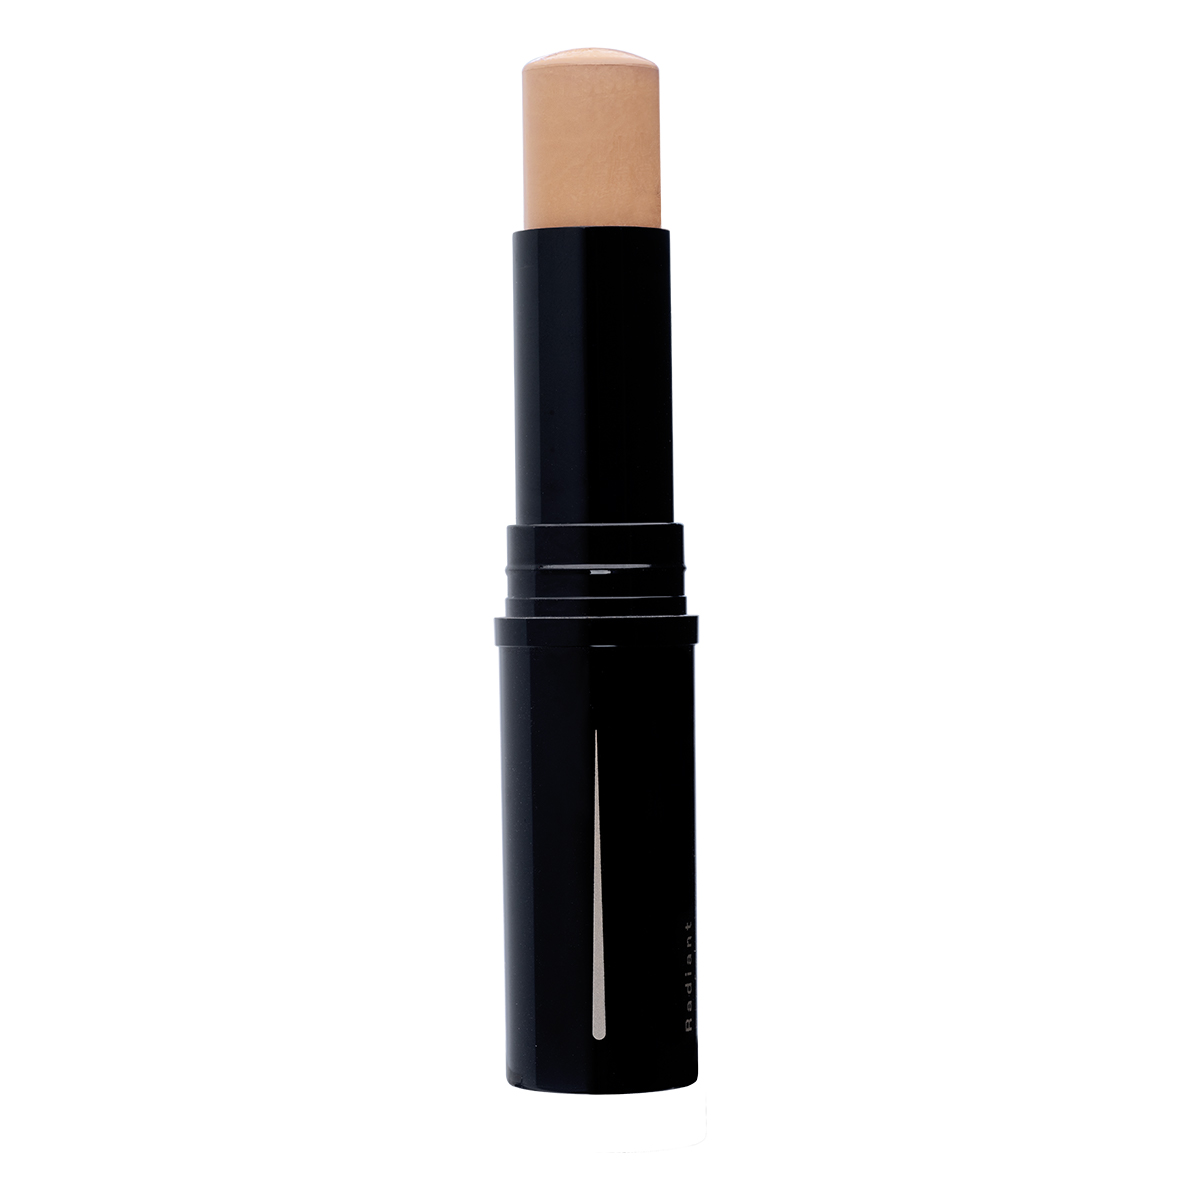 NATURAL FIX EXTRA COVERAGE STICK FOUNDATION  WATERPROOF SPF 15 (01 LATTE)